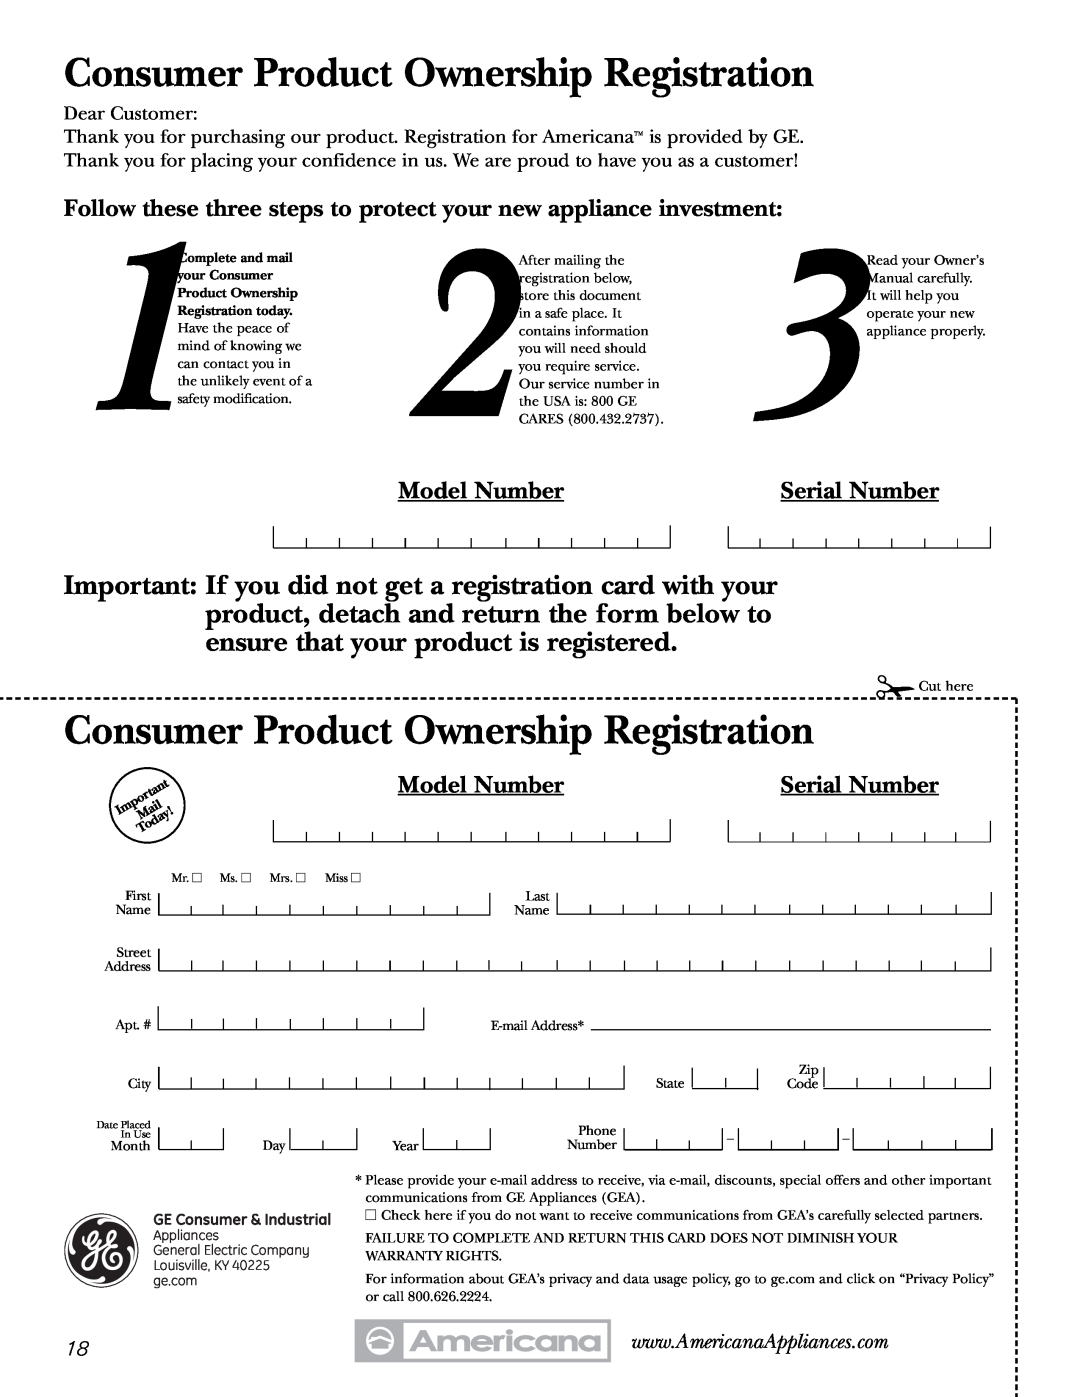 Americana Appliances 197D5984P004 Model Number, Serial Number, Dear Customer, Consumer Product Ownership Registration 